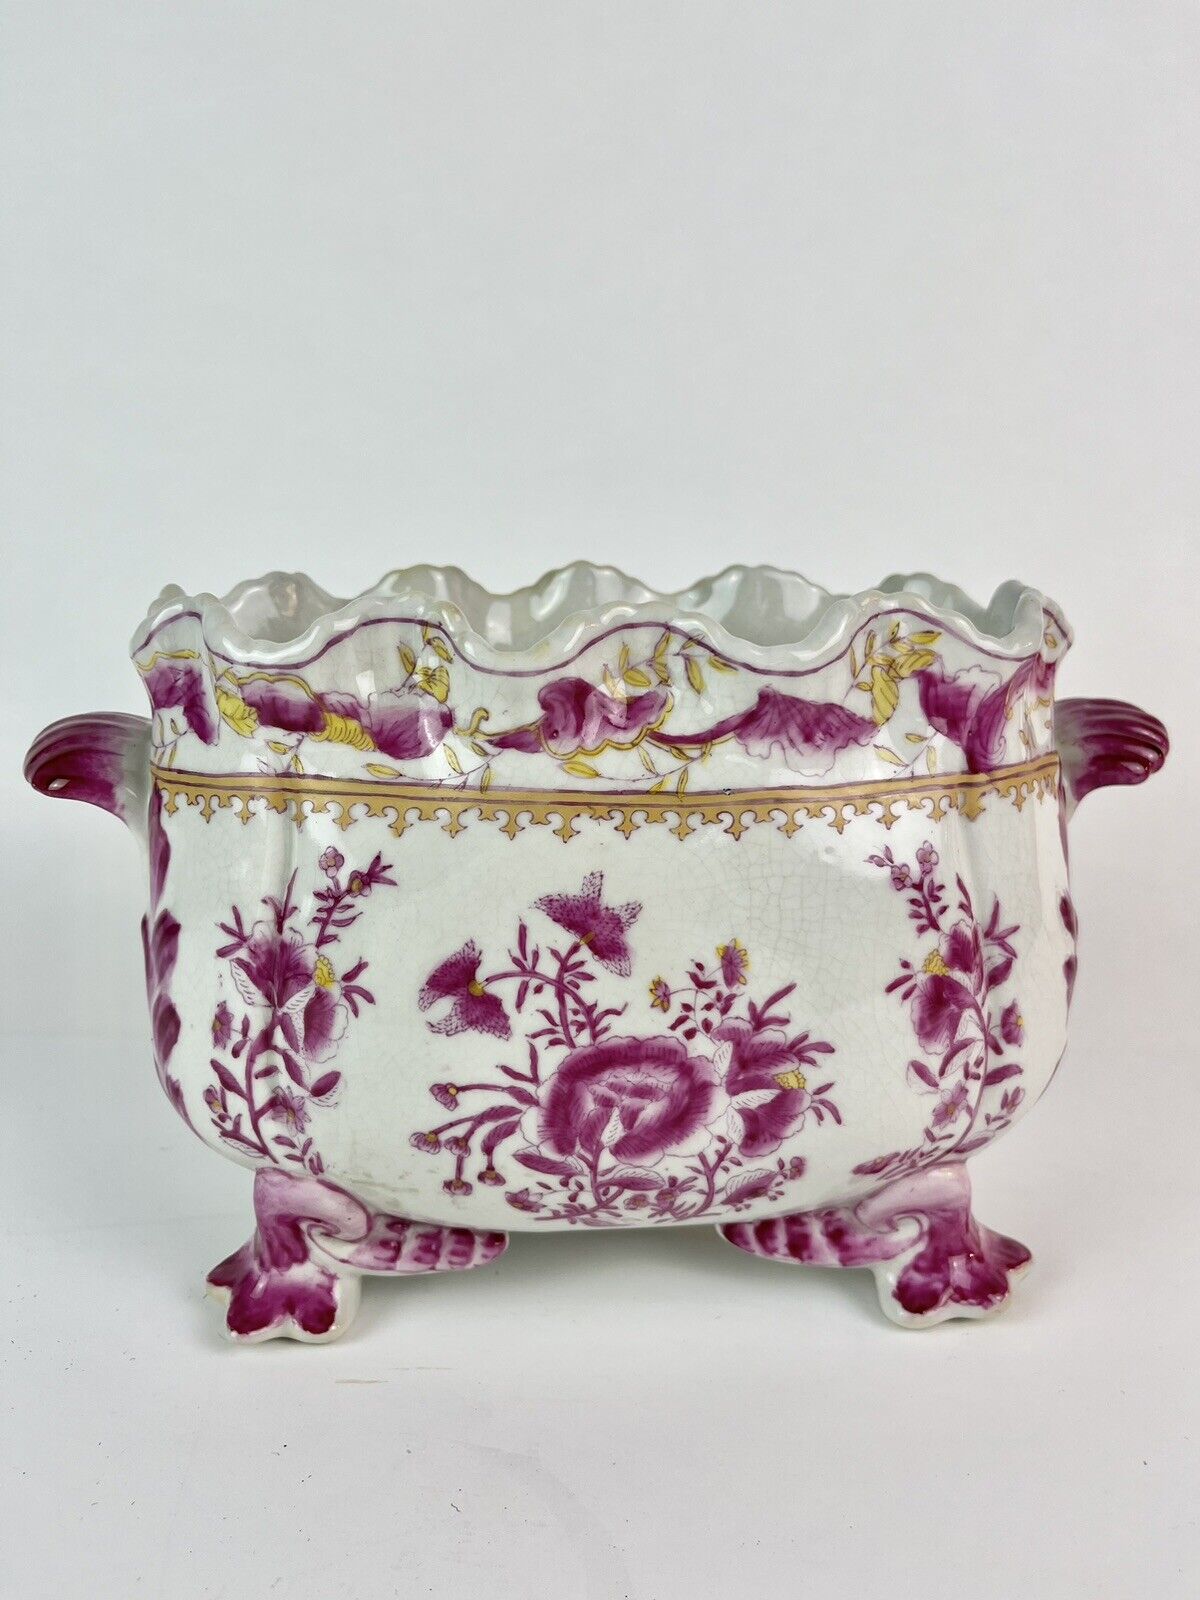 United Wilson JUWC 1897 Planter Pink & White Floral Porcelain Chinoiserie Footed